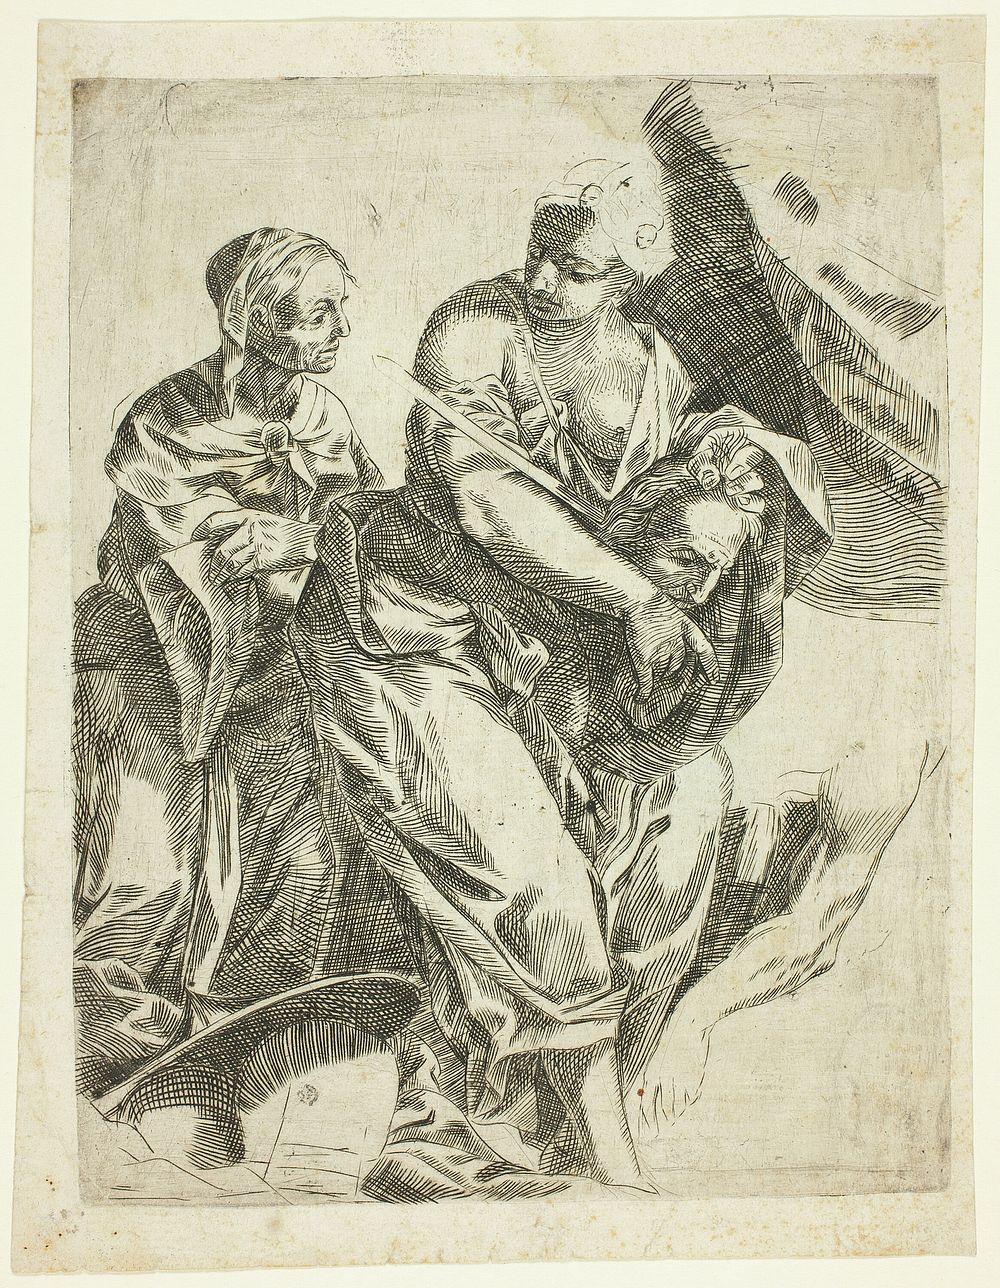 Judith with the Head of Holofernes by Marco San Martino